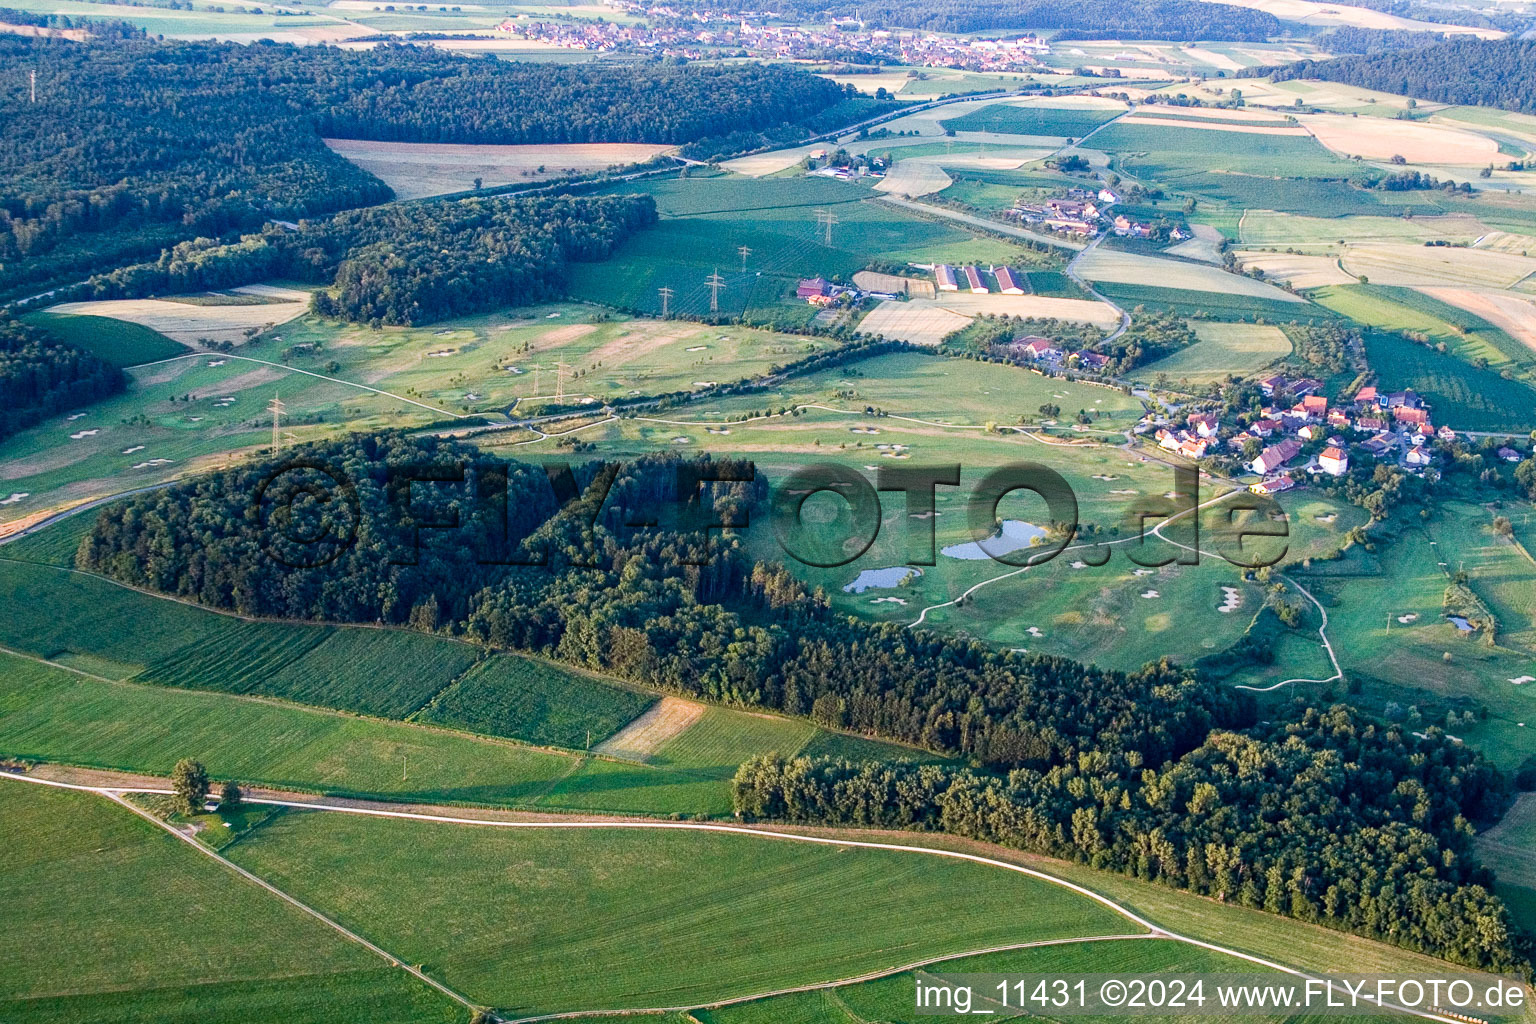 Aerial view of Grounds of the Golf course at Golfclub Steisslingen e.V. am Bodensee in Steisslingen in the state Baden-Wurttemberg